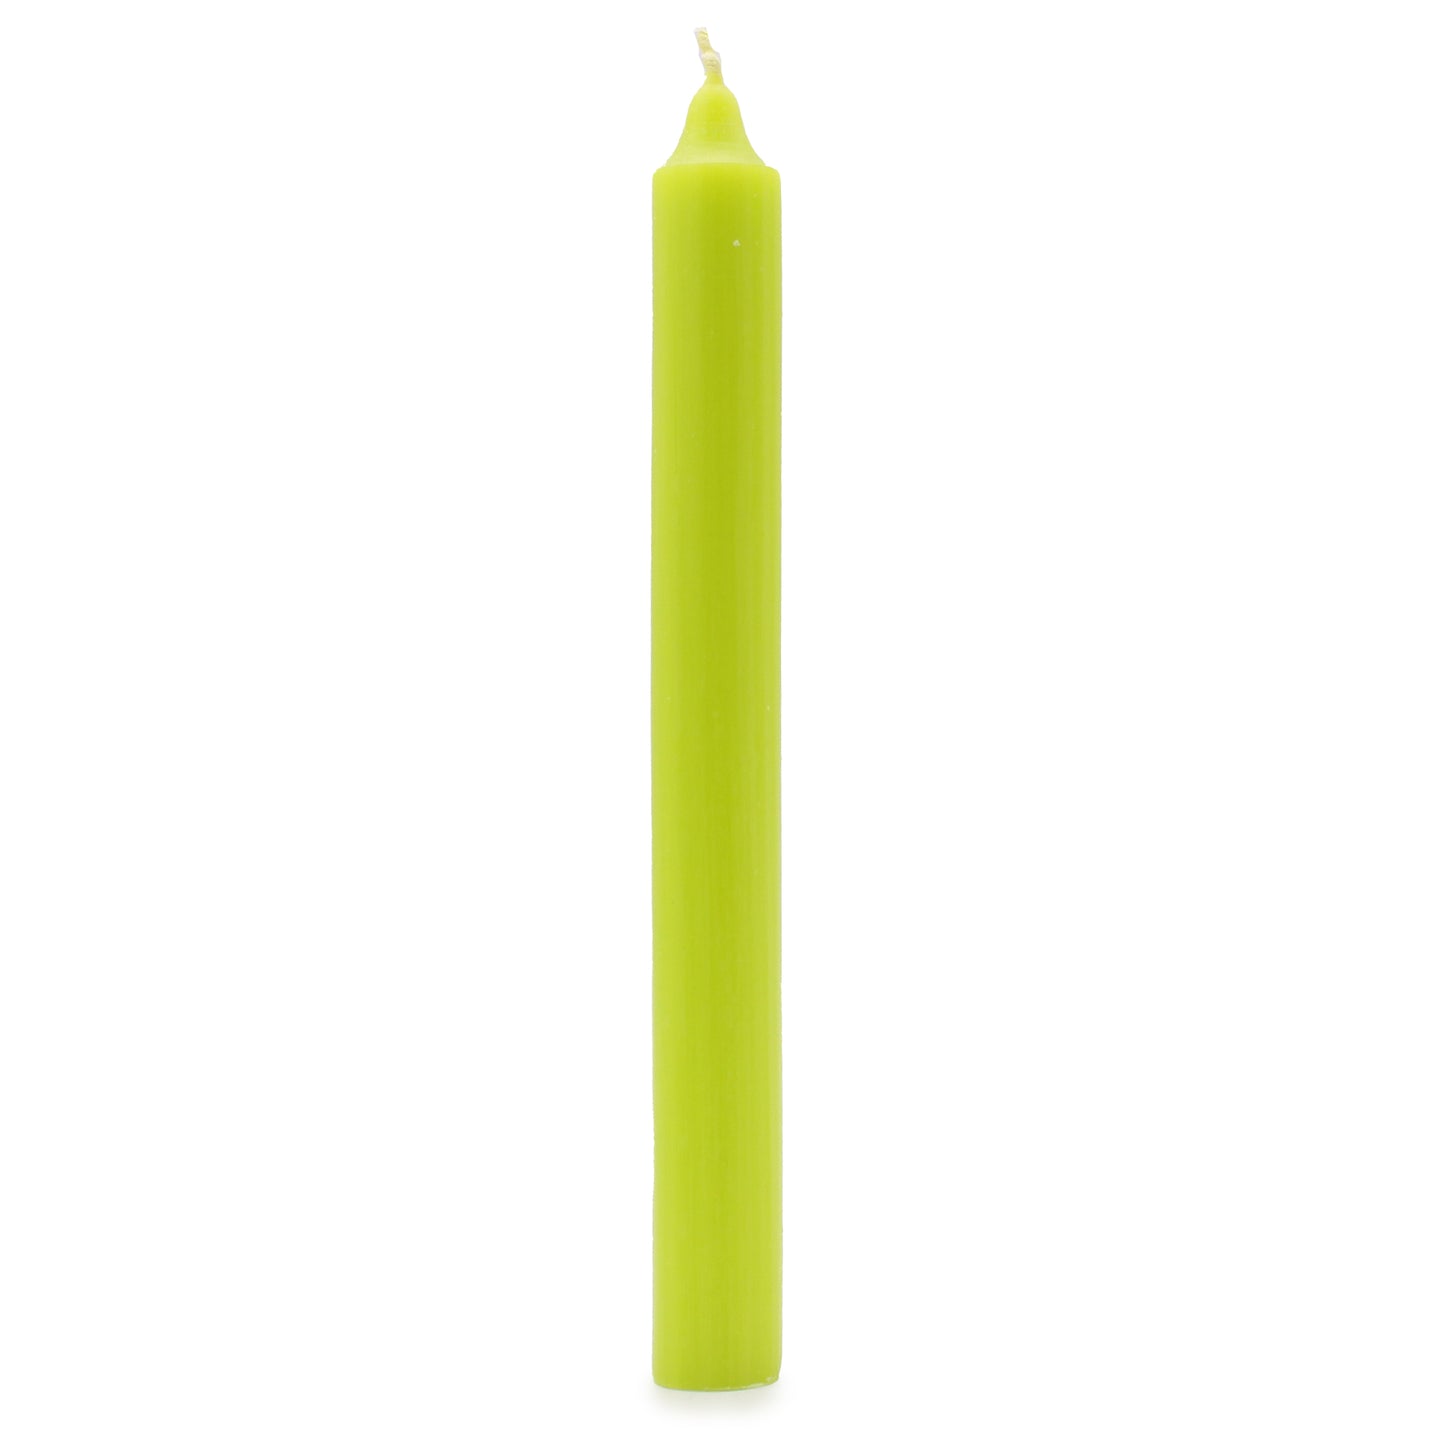 Solid Colour Dinner Candles - Rustic Lime Green - Pack of 5